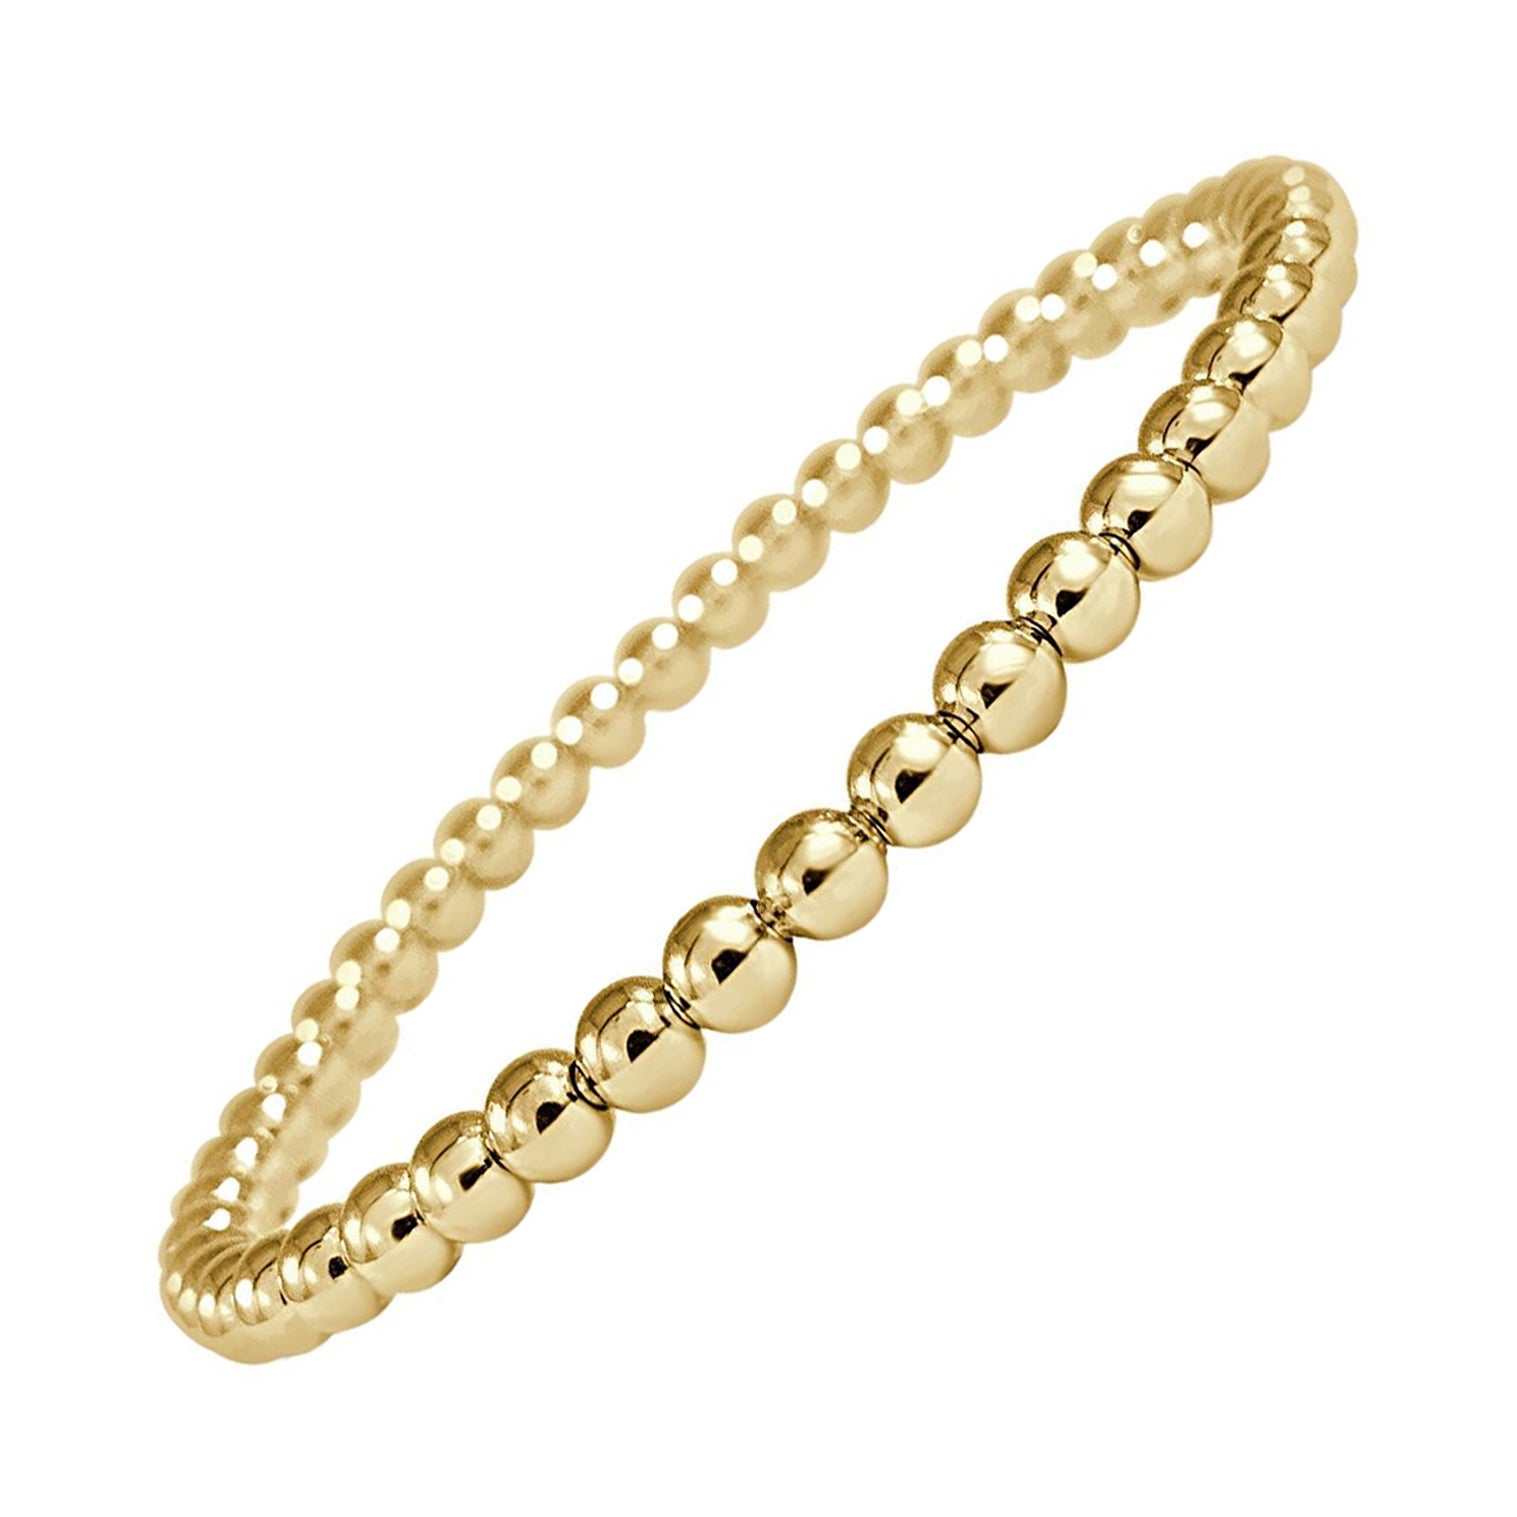 18k Yellow Gold Beaded Stretch Bracelet Beads 4mm For Sale